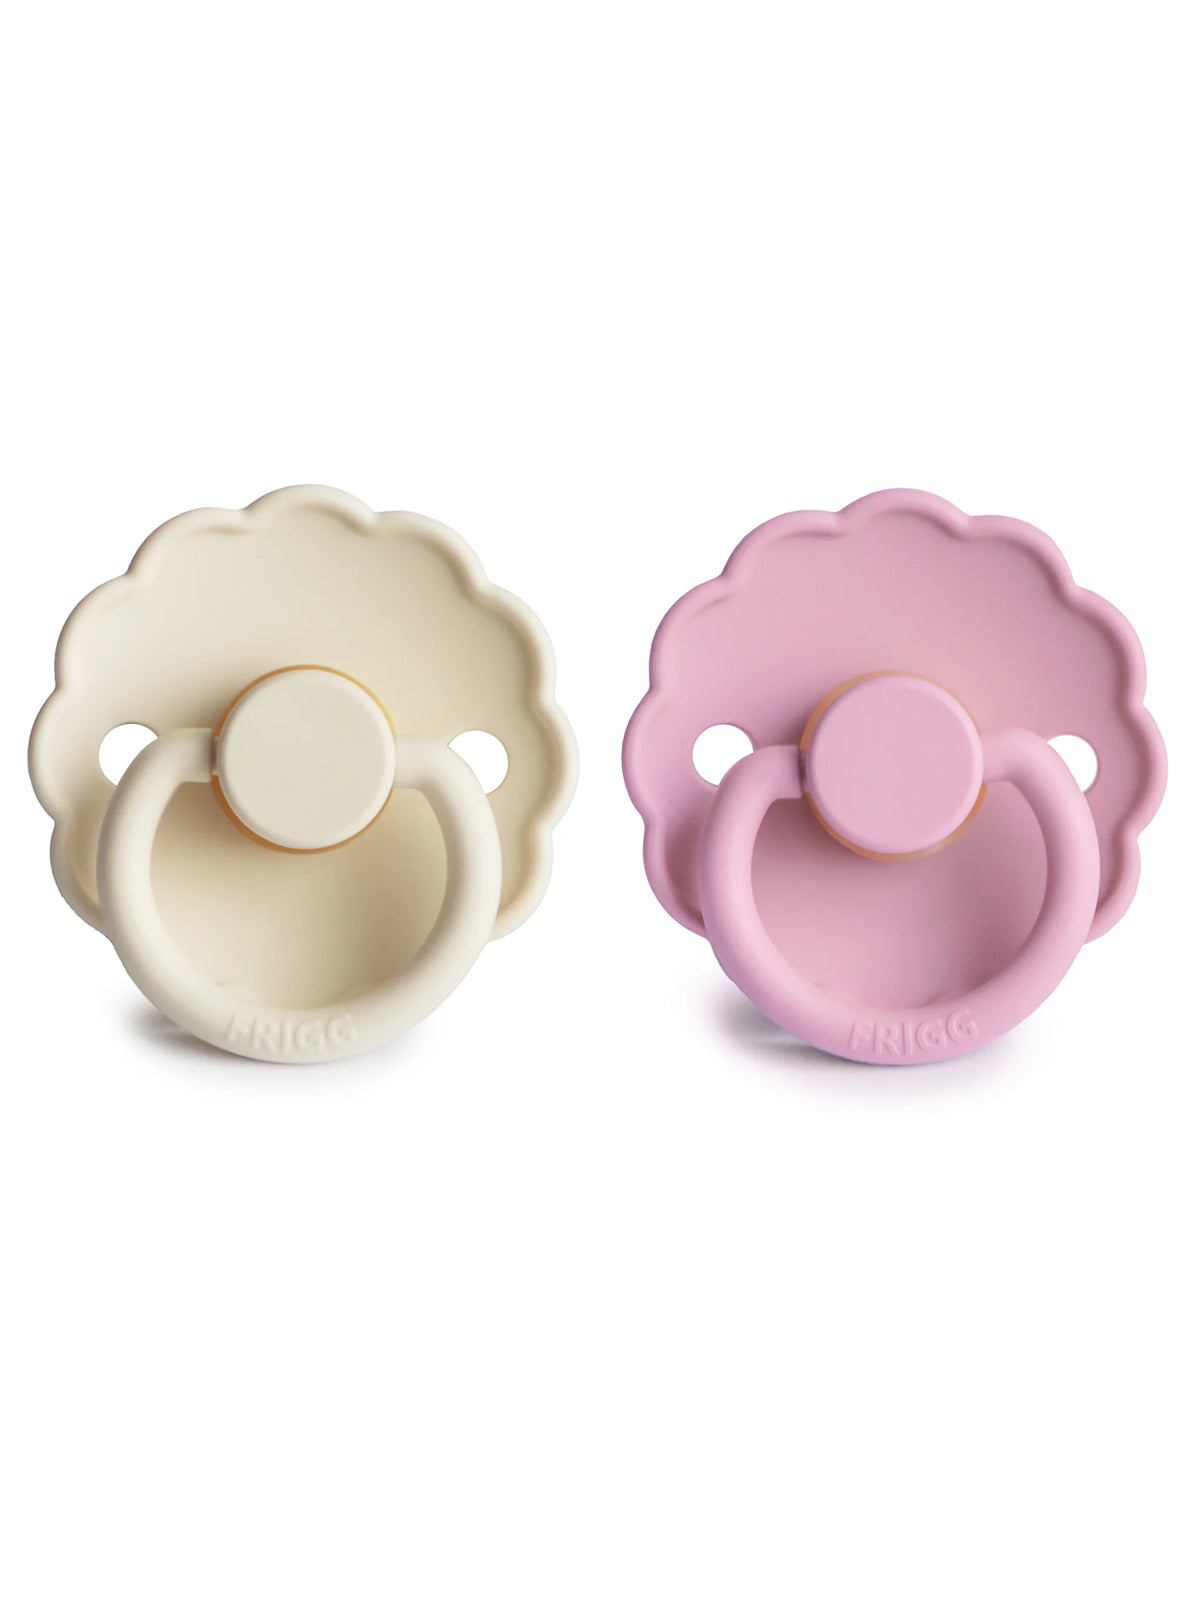 Daisy Natural Rubber Pacifier 2-Pack, Cream/Lupine